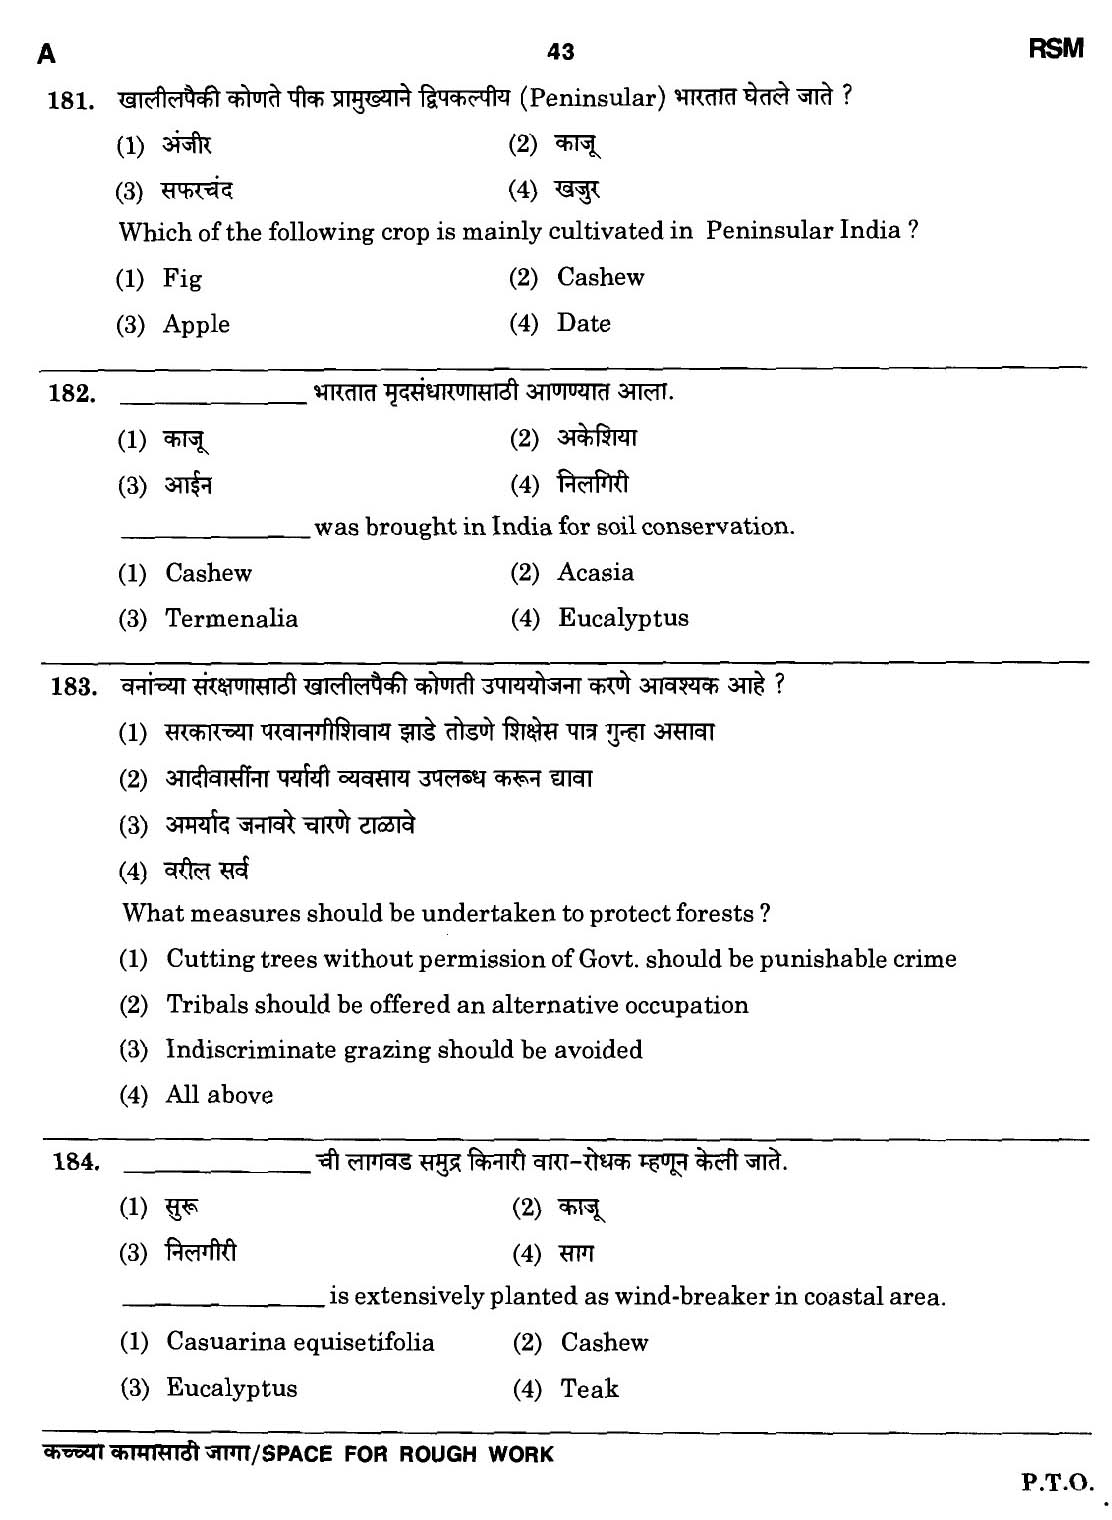 MPSC Agricultural Services Preliminary Exam 2011 Question Paper 42